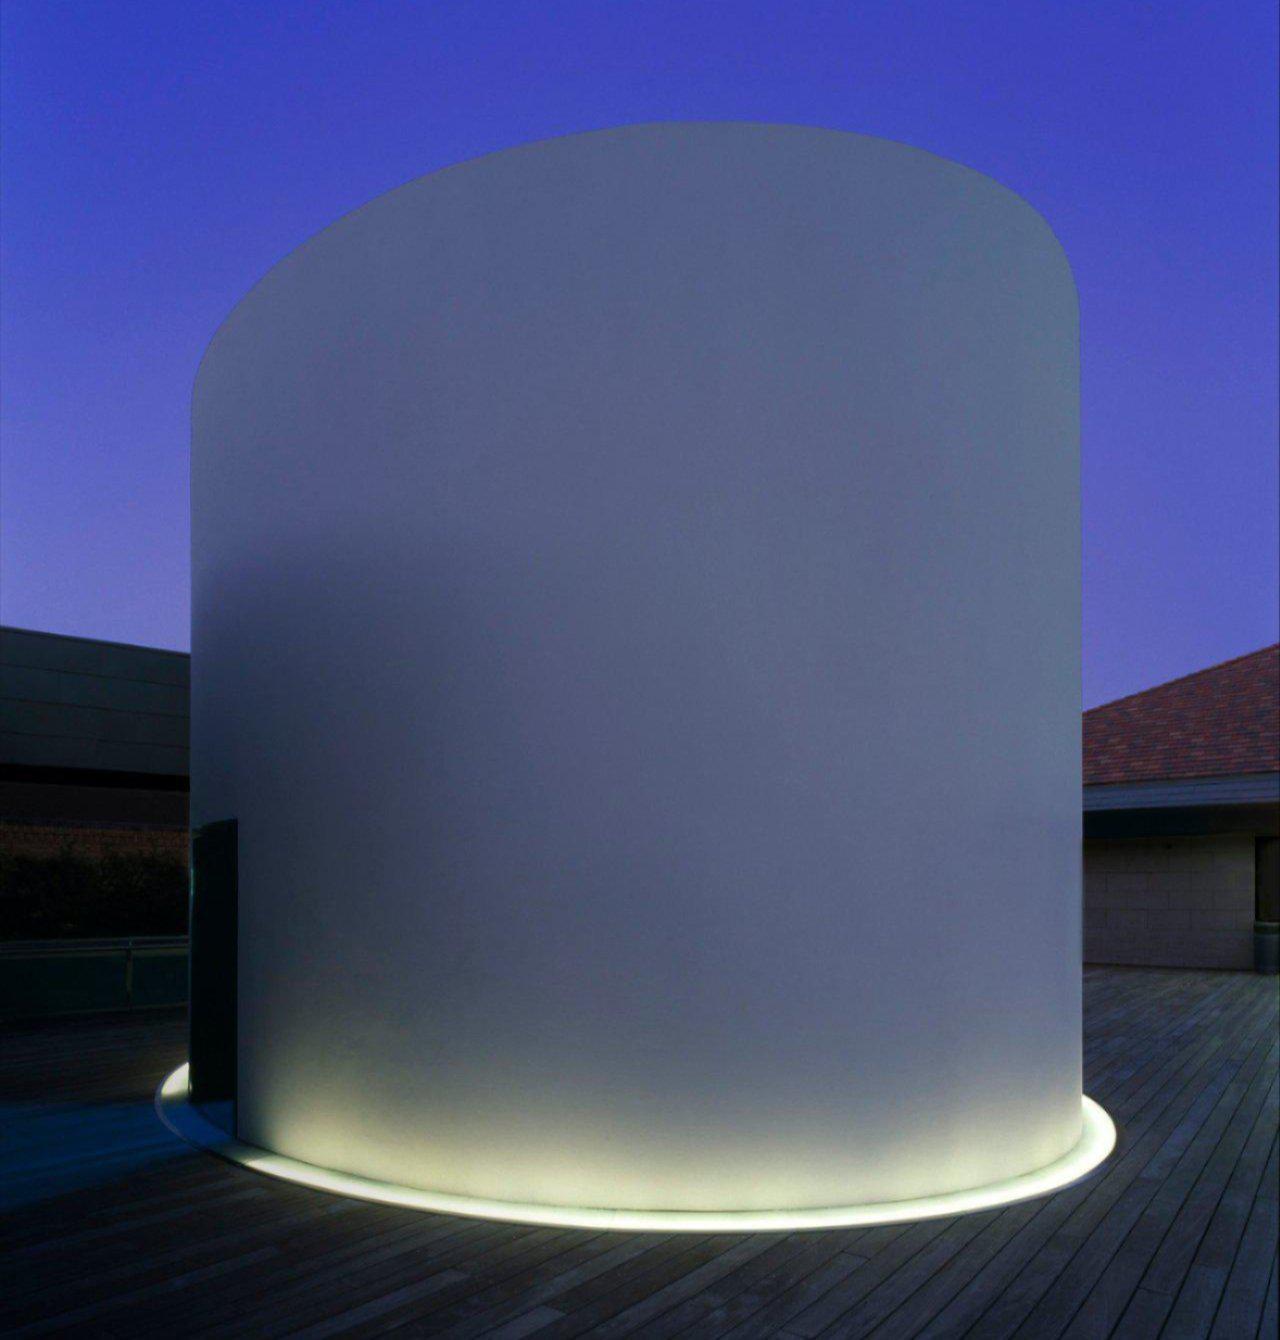 A photo of James Turrell's 